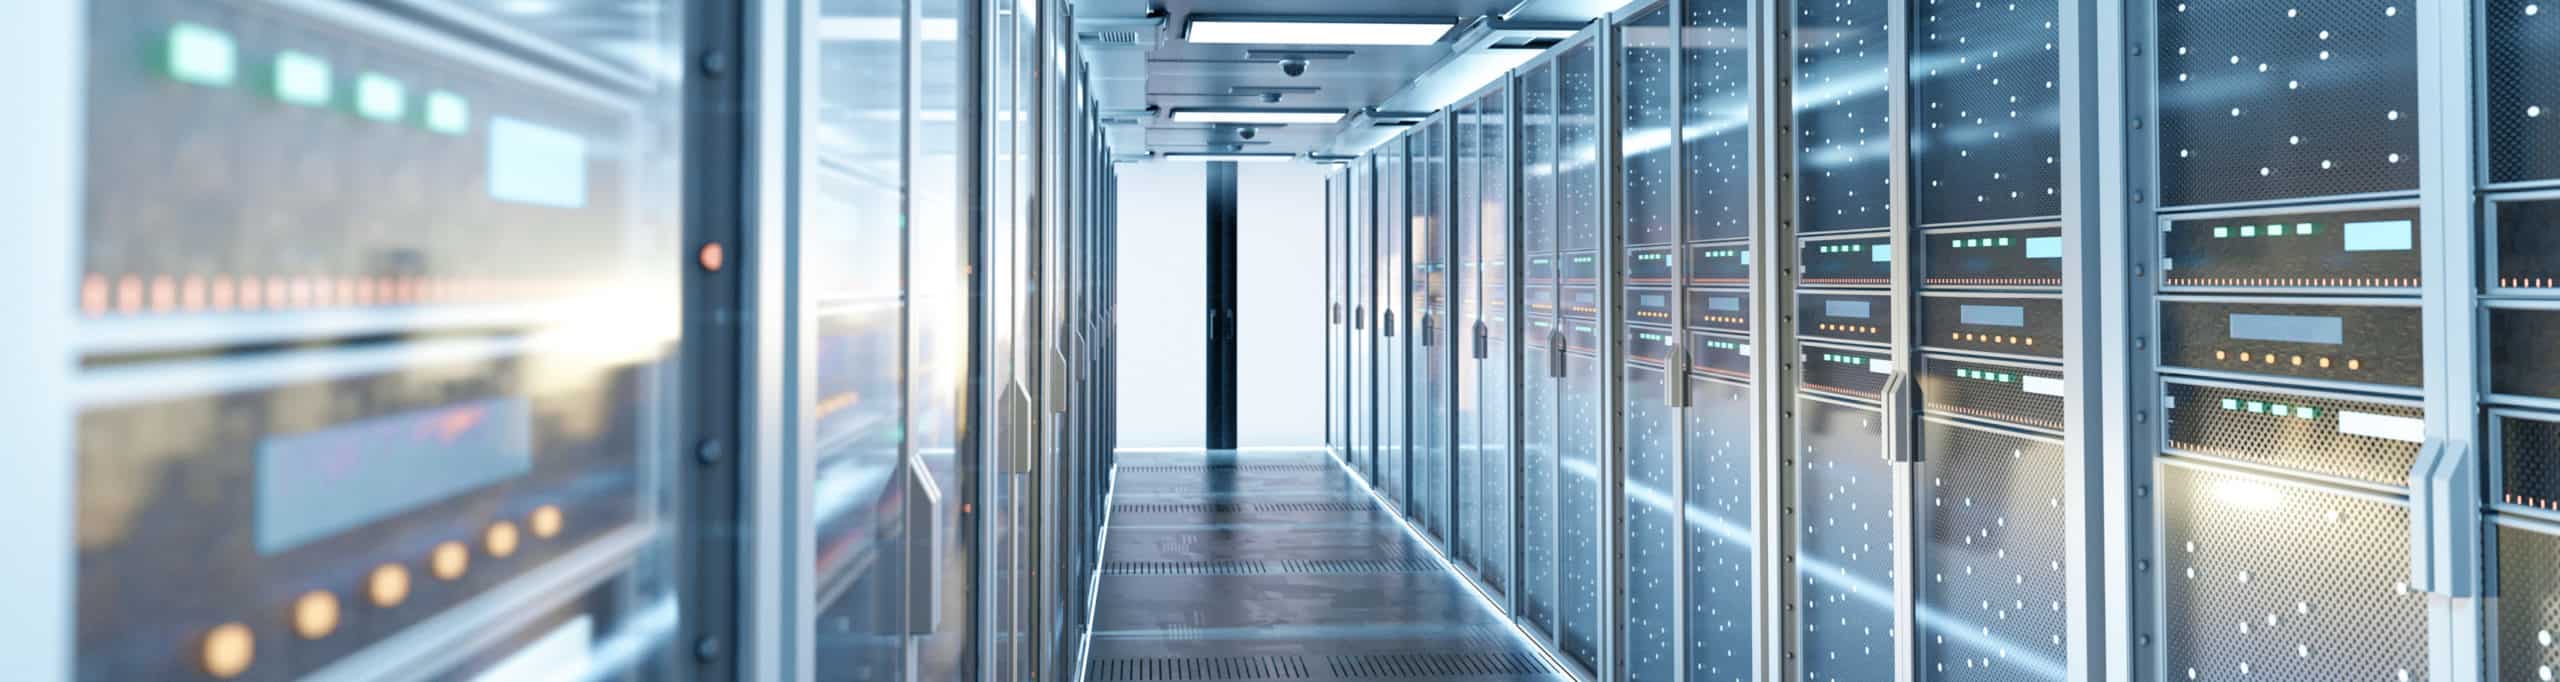 IT Networks & Data Centers